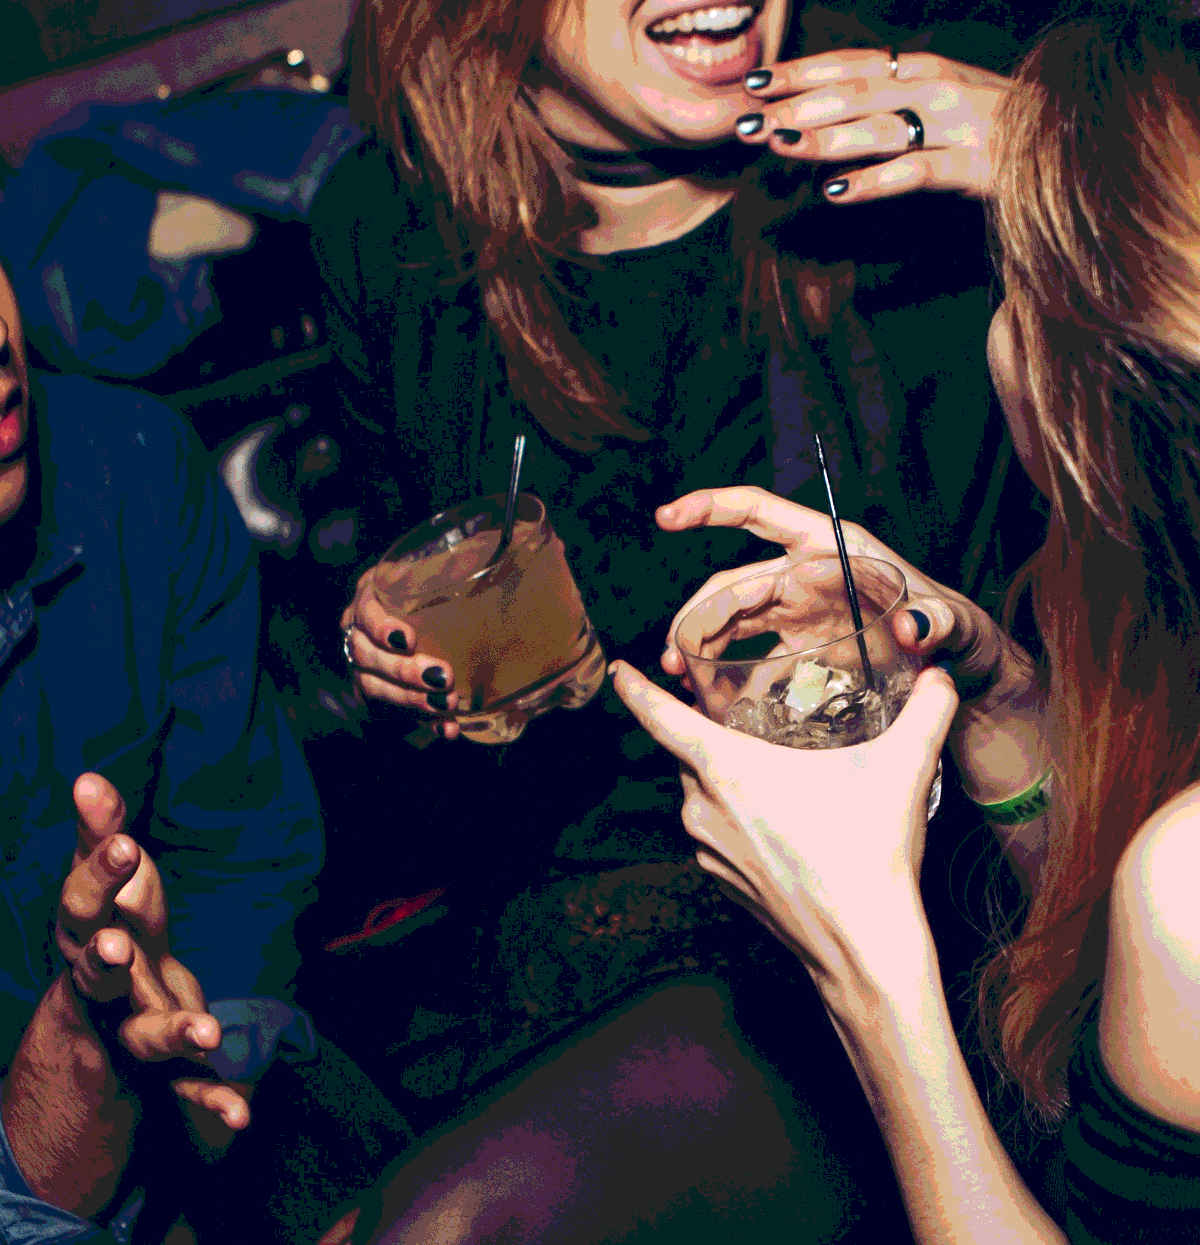 Two ladies and a gentleman share laughs over drinks in a nightclub